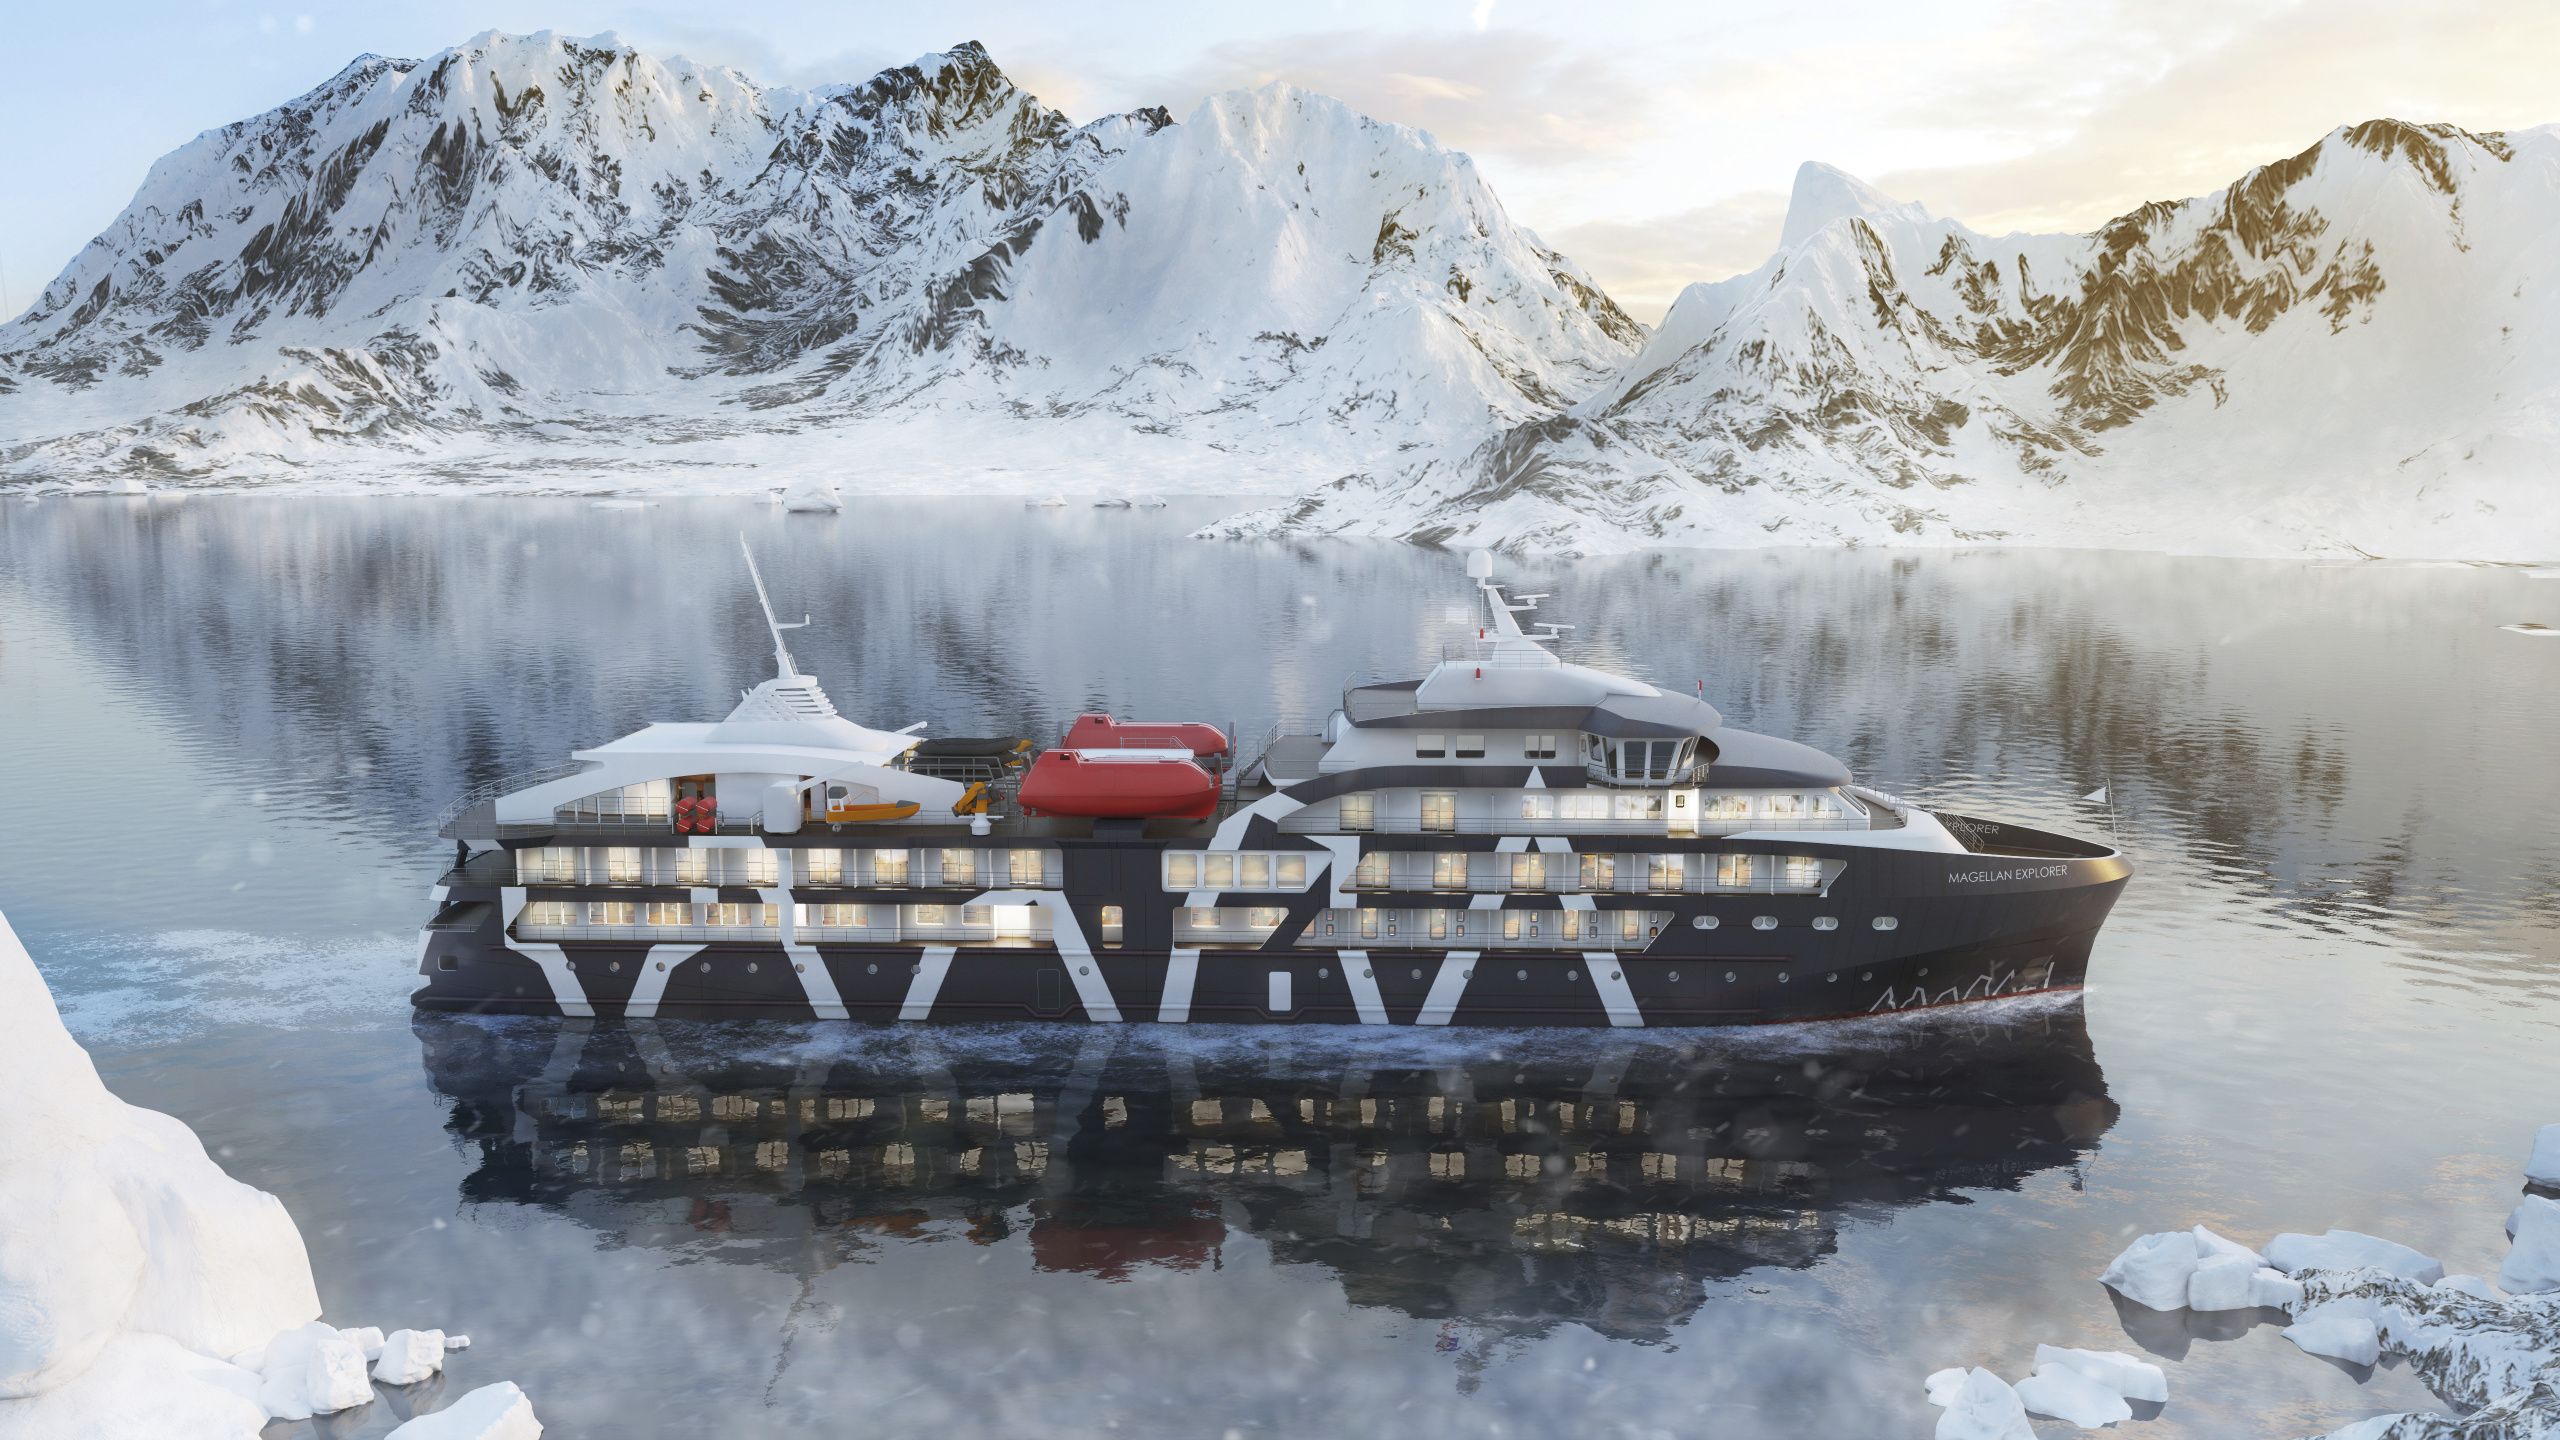 Antarctica21 has begun construction of its latest vessel, Magellan Discoverer, which will join its fleet for the 2026-27 Antarctic season.